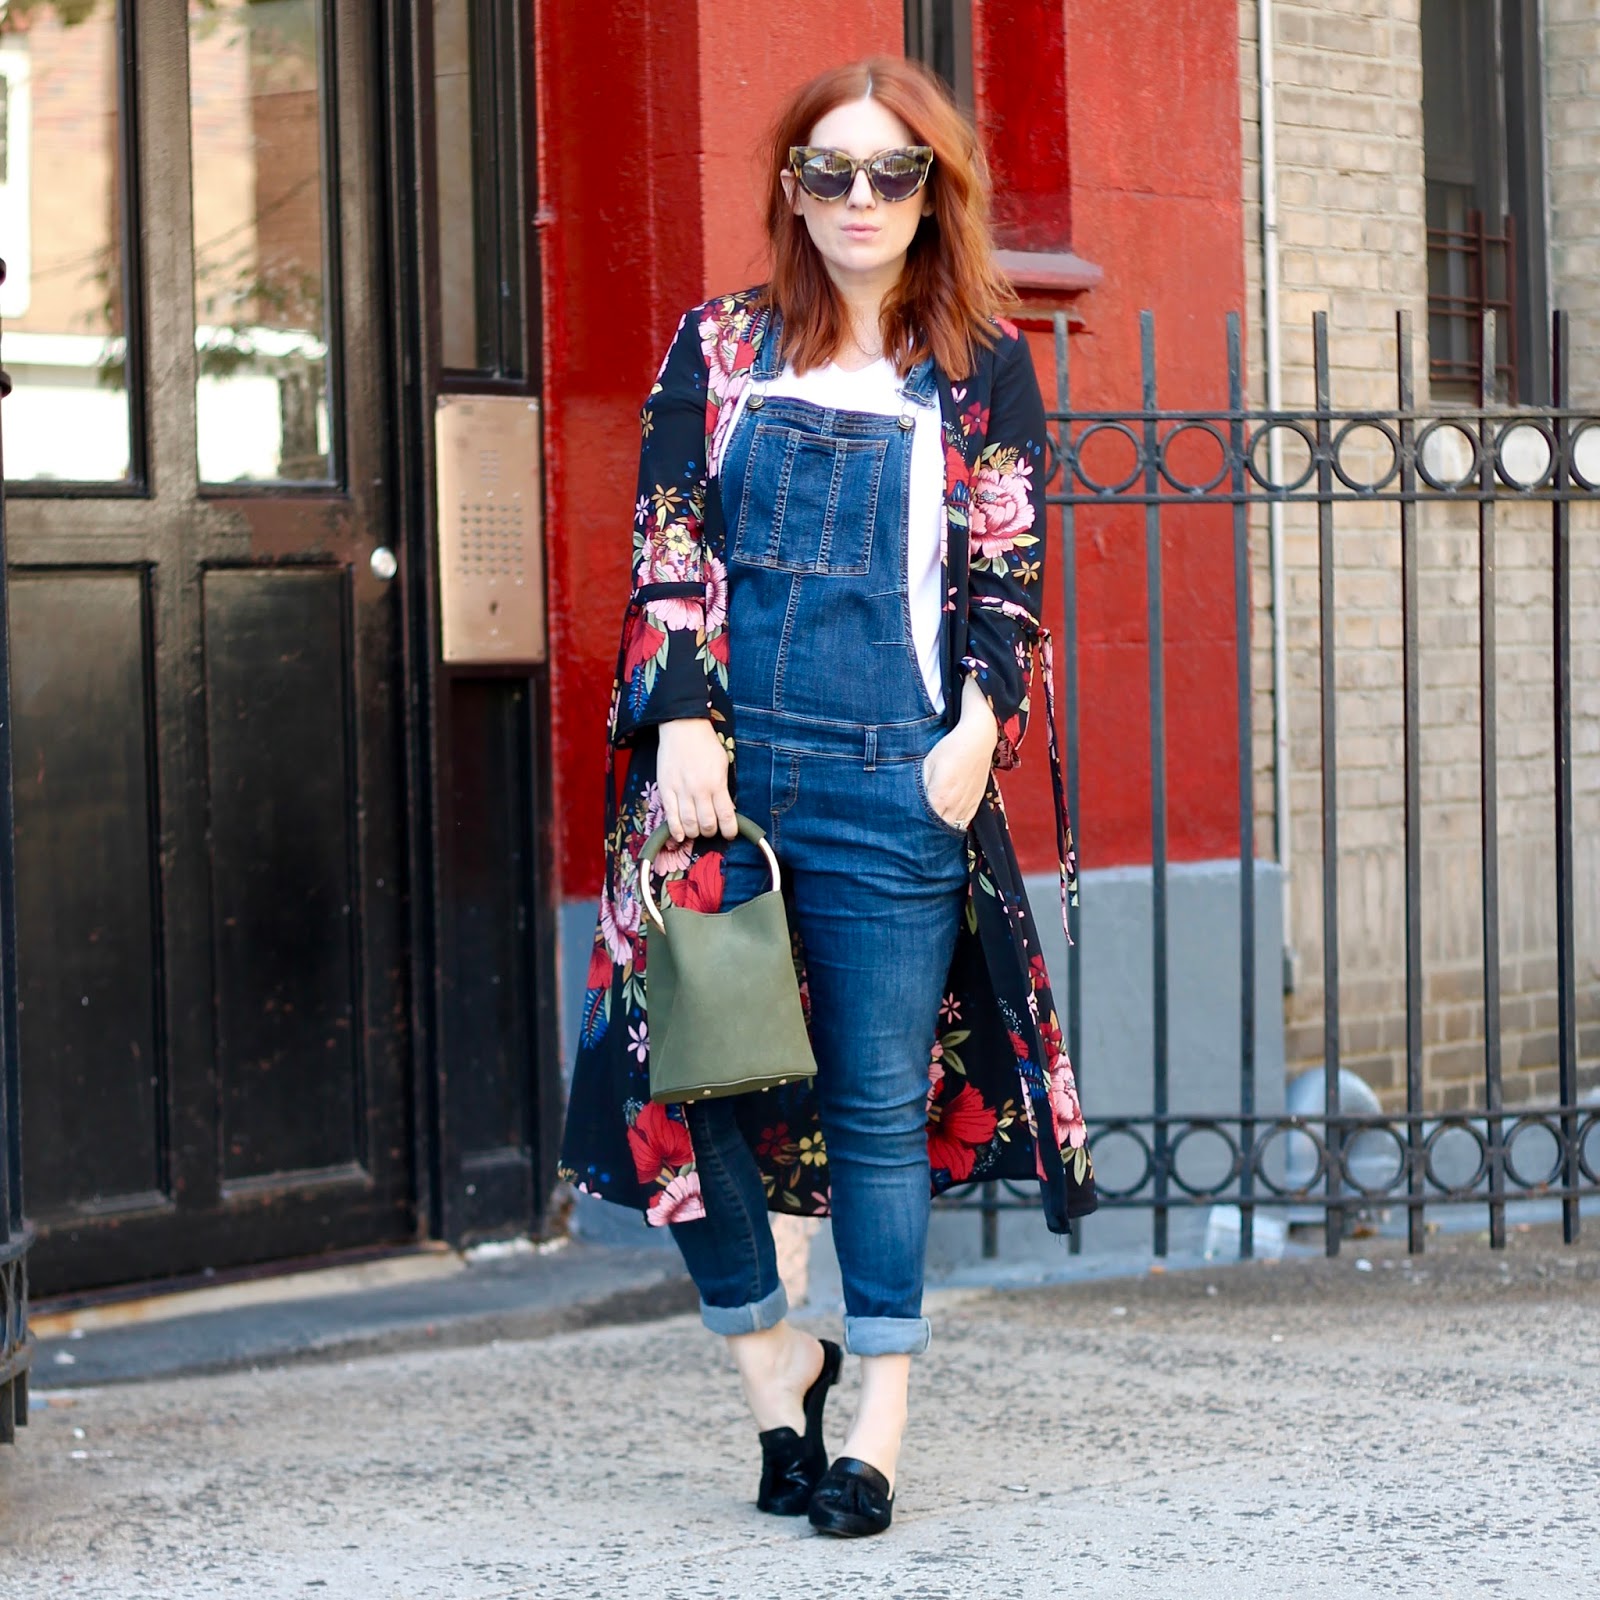 overalls, overalls styles, how to wear overalls, 8 ways to wear overalls, free people overalls, fall fashion, flashback fashion, 90s fashion, fall 2019 trends 